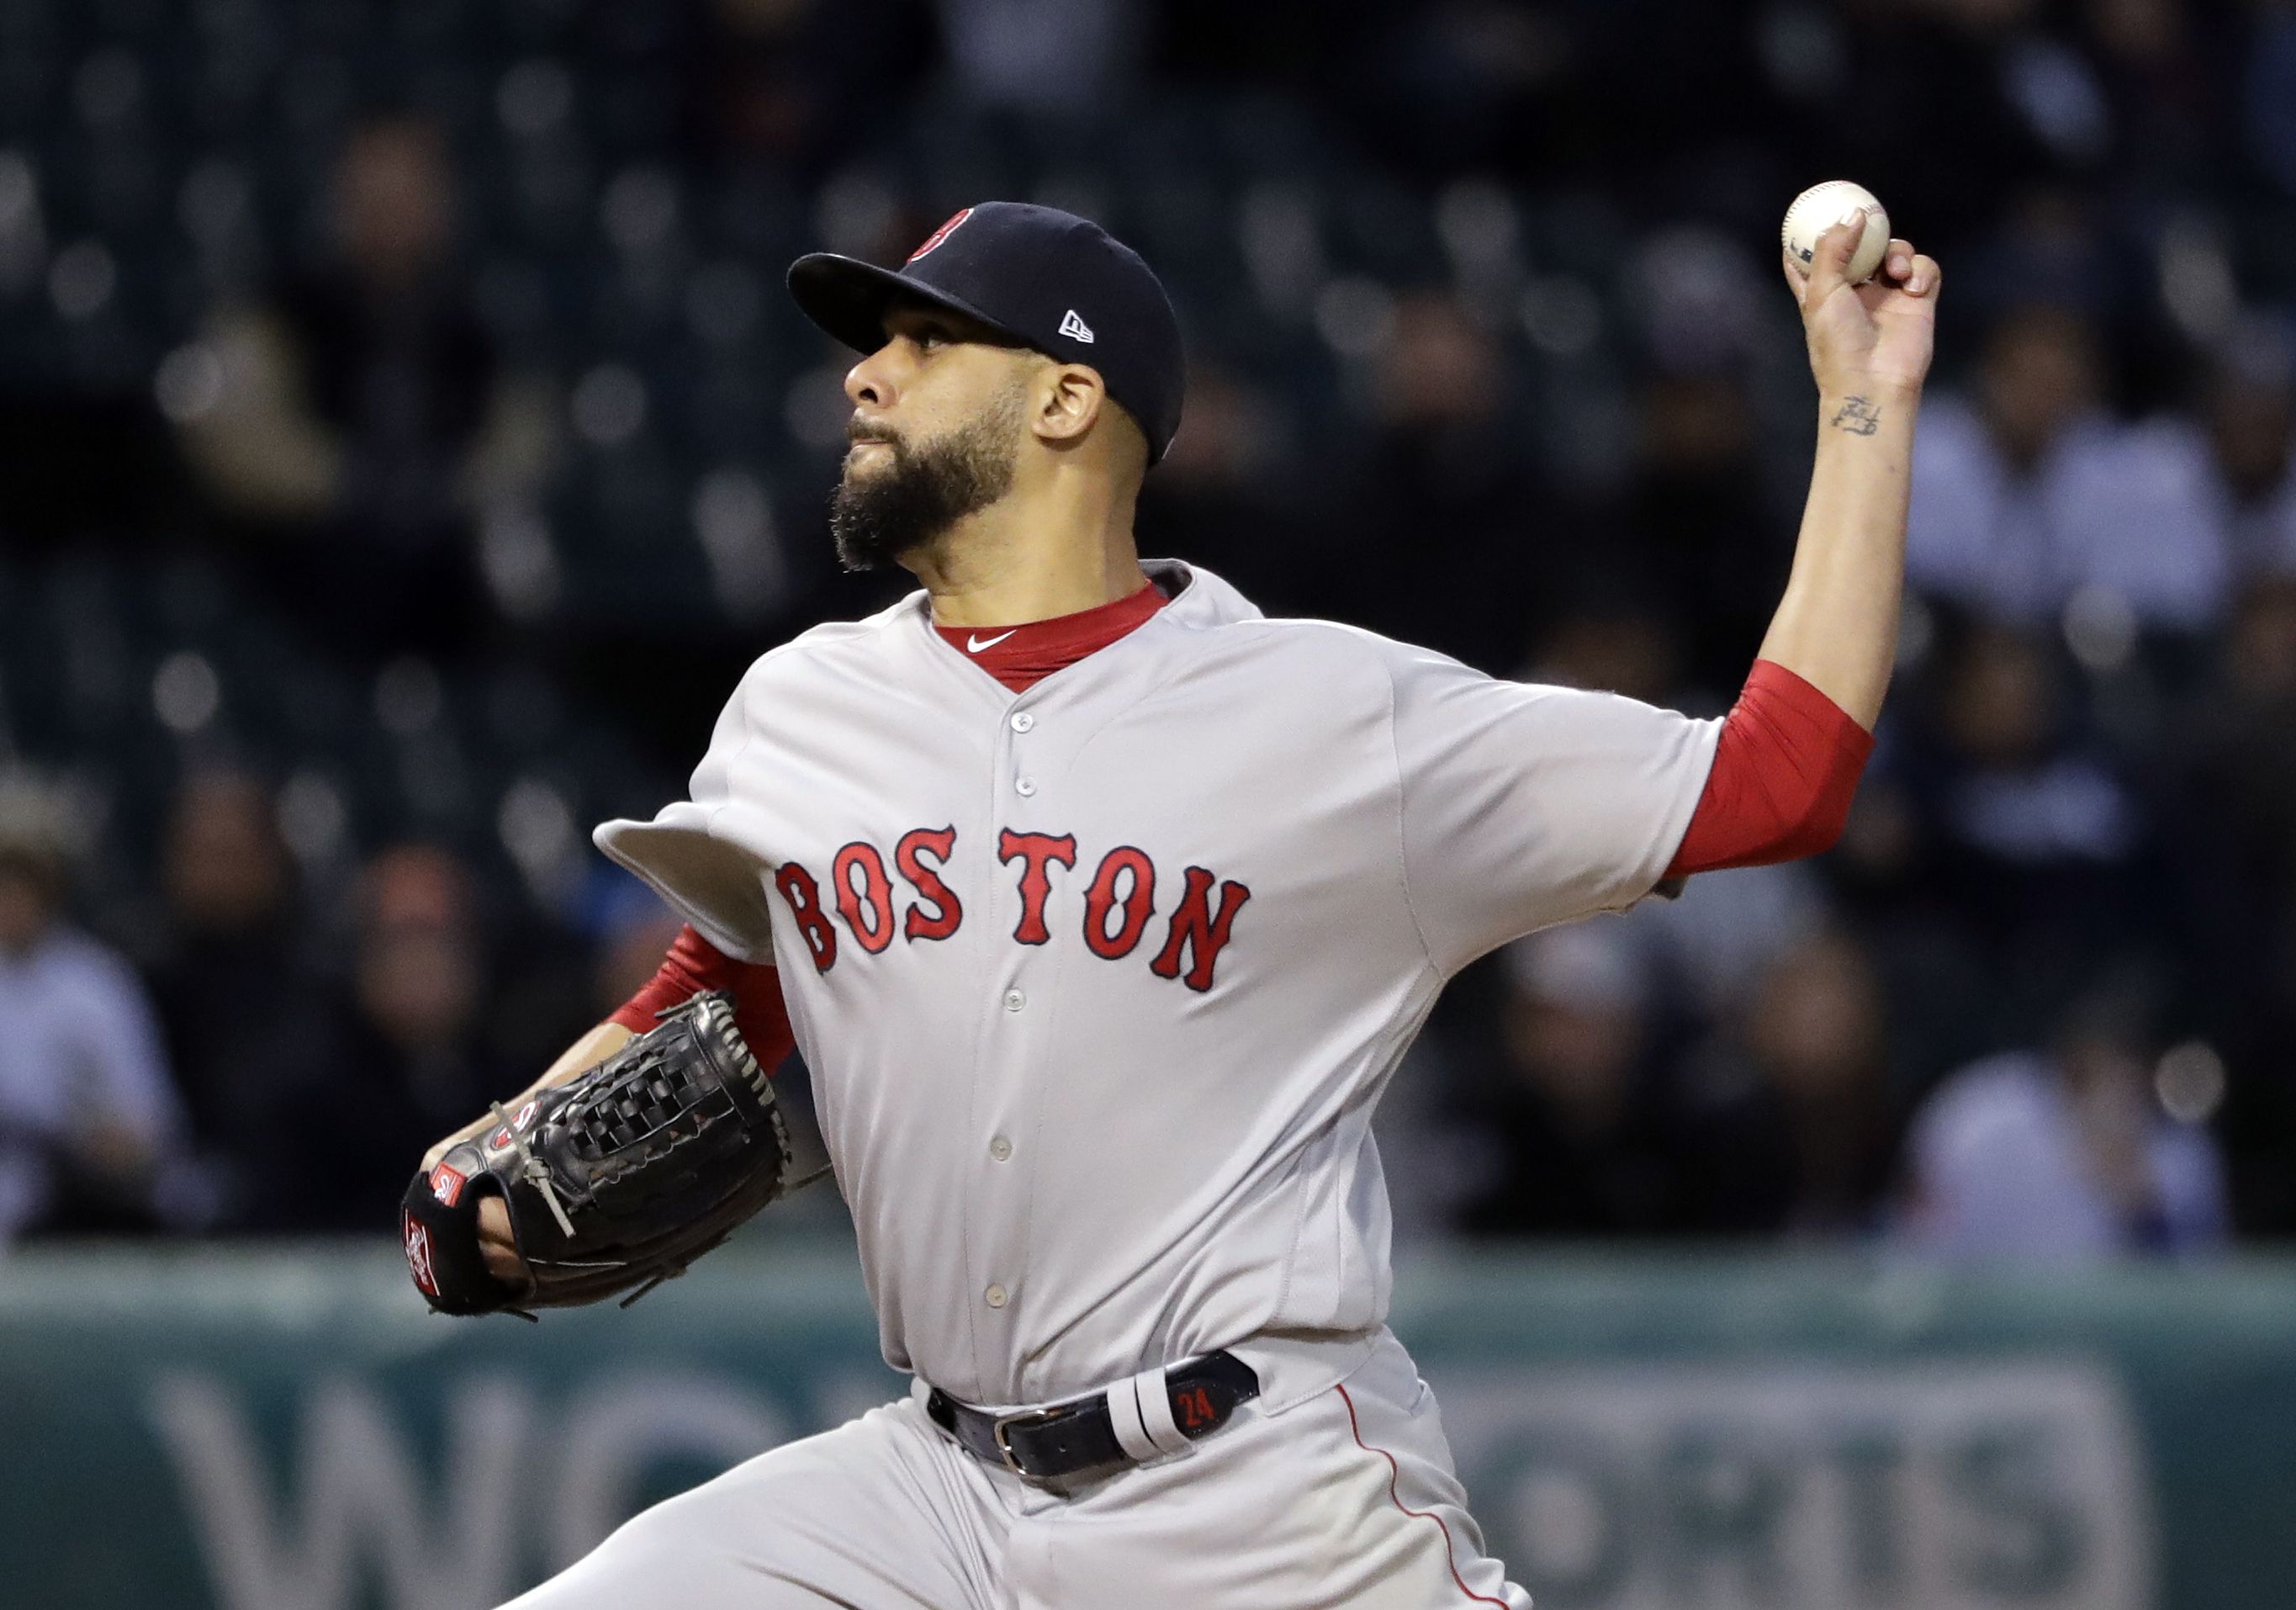 Eckersley, Price feud makes rooting for Red Sox a bit less fun